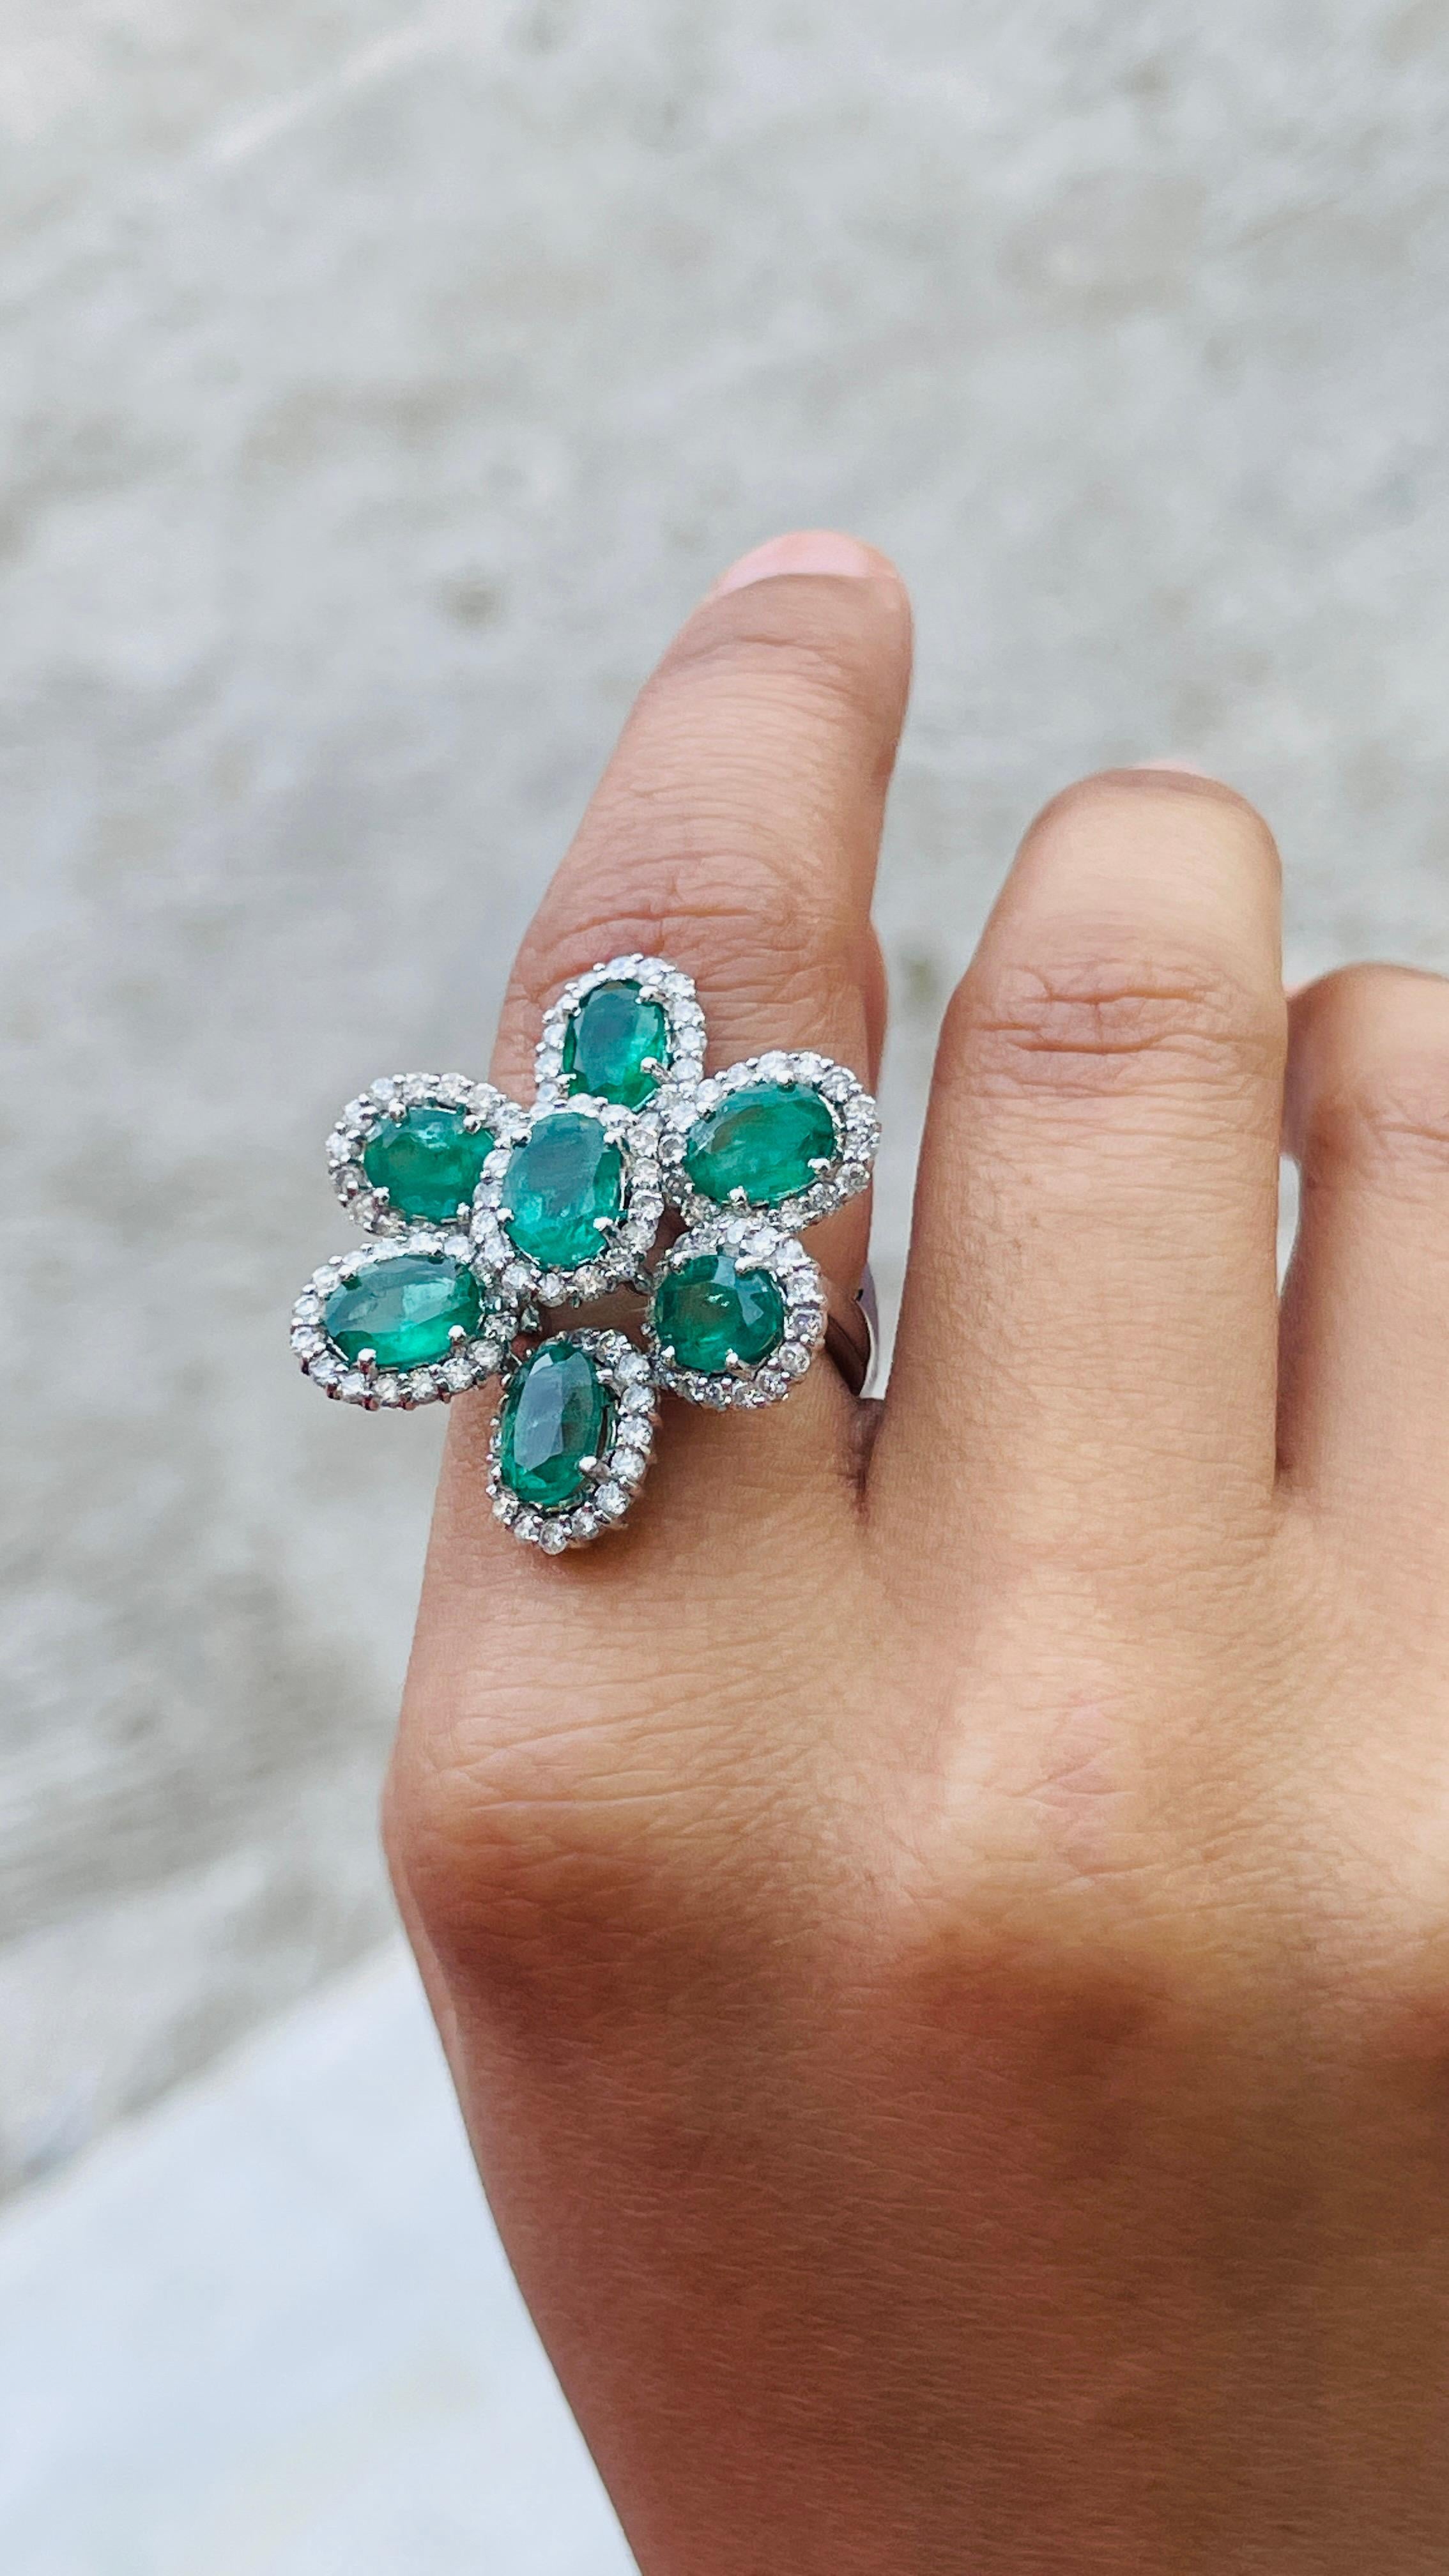 For Sale:  Statement 5 ct Emerald Flower Ring with Halo Diamonds in 14 Karat White Gold 4